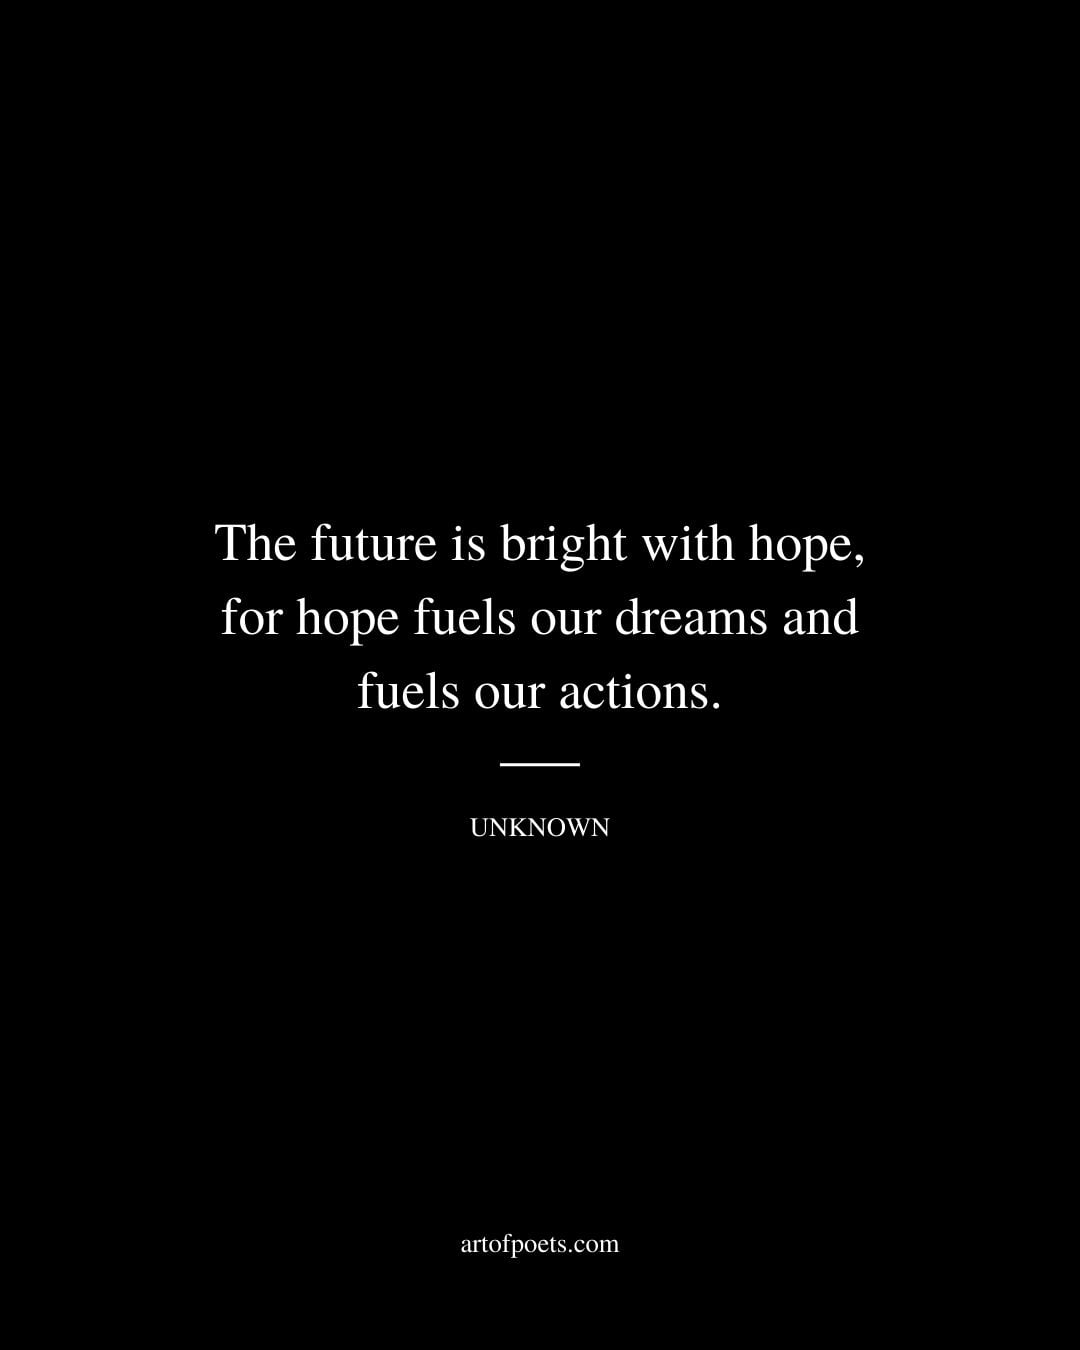 The future is bright with hope for hope fuels our dreams and fuels our actions. Unknown